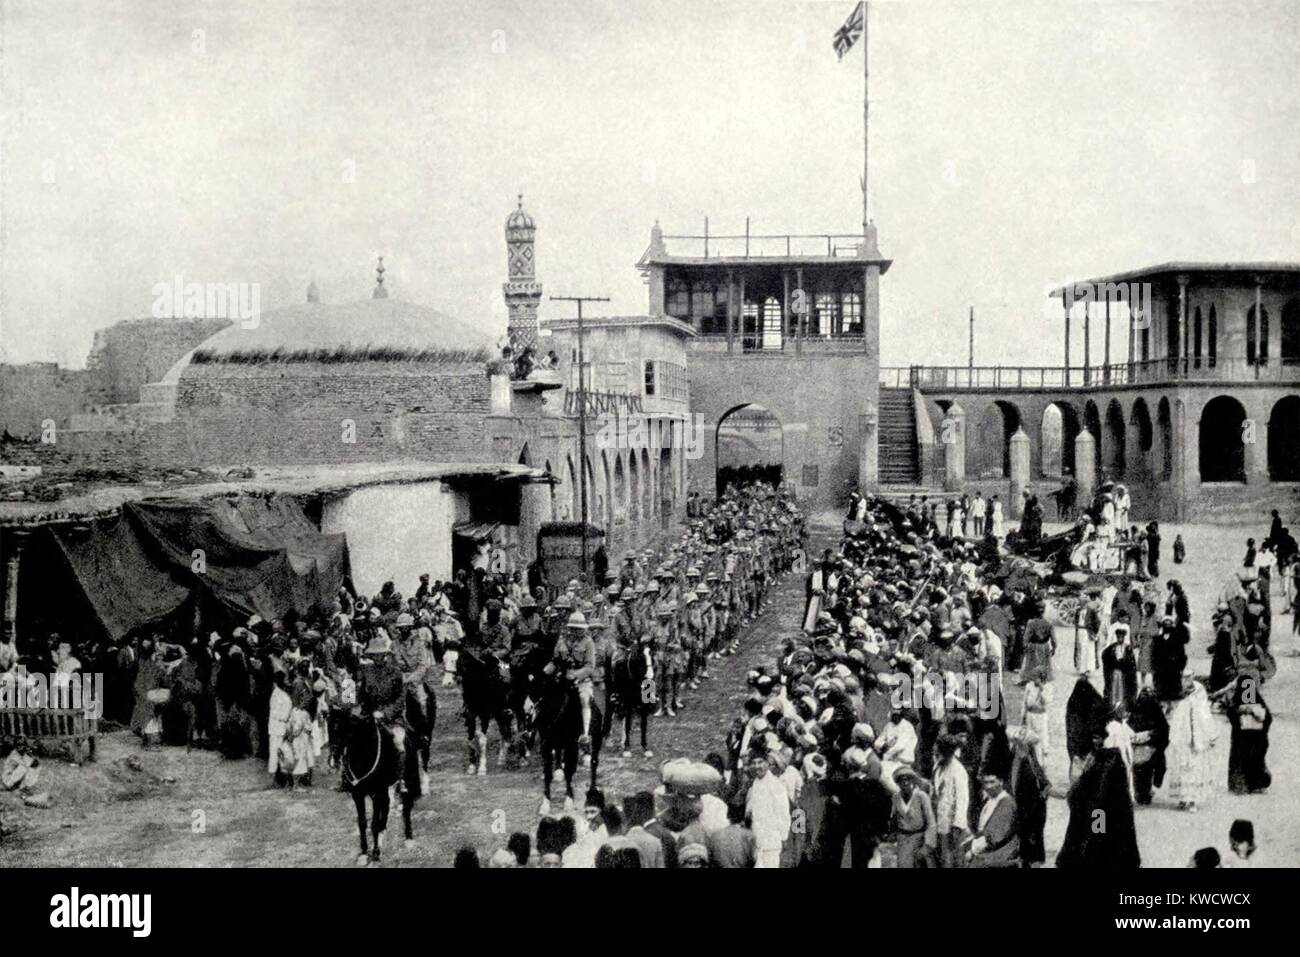 World War 1 in the Middle East. The Union Jack flies over Bagdad as British troops enter the city after its capture on March 11, 1917. (BSLOC 2013 1 79) Stock Photo